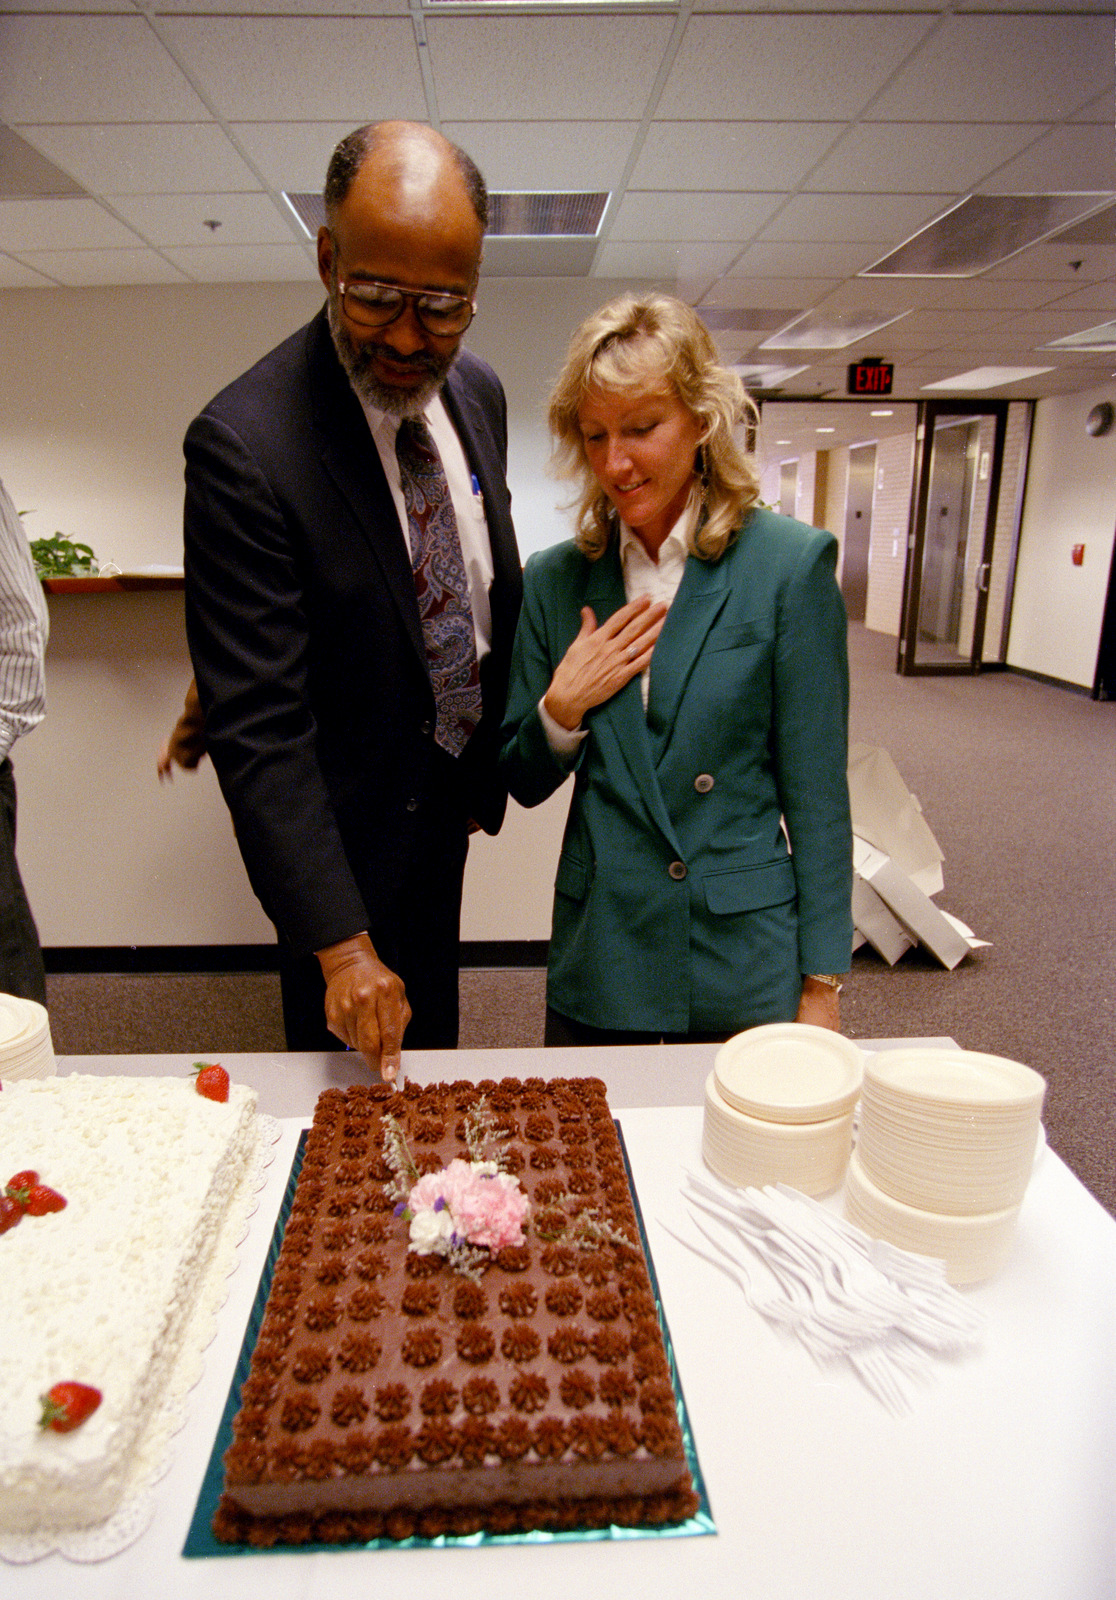 Leon Dash cuts a cake as photographer Carol Guzy looks on at the Post, April, 1995, after it was announced they both won Pulitzer Prizes. (AP/Greg Gibson)